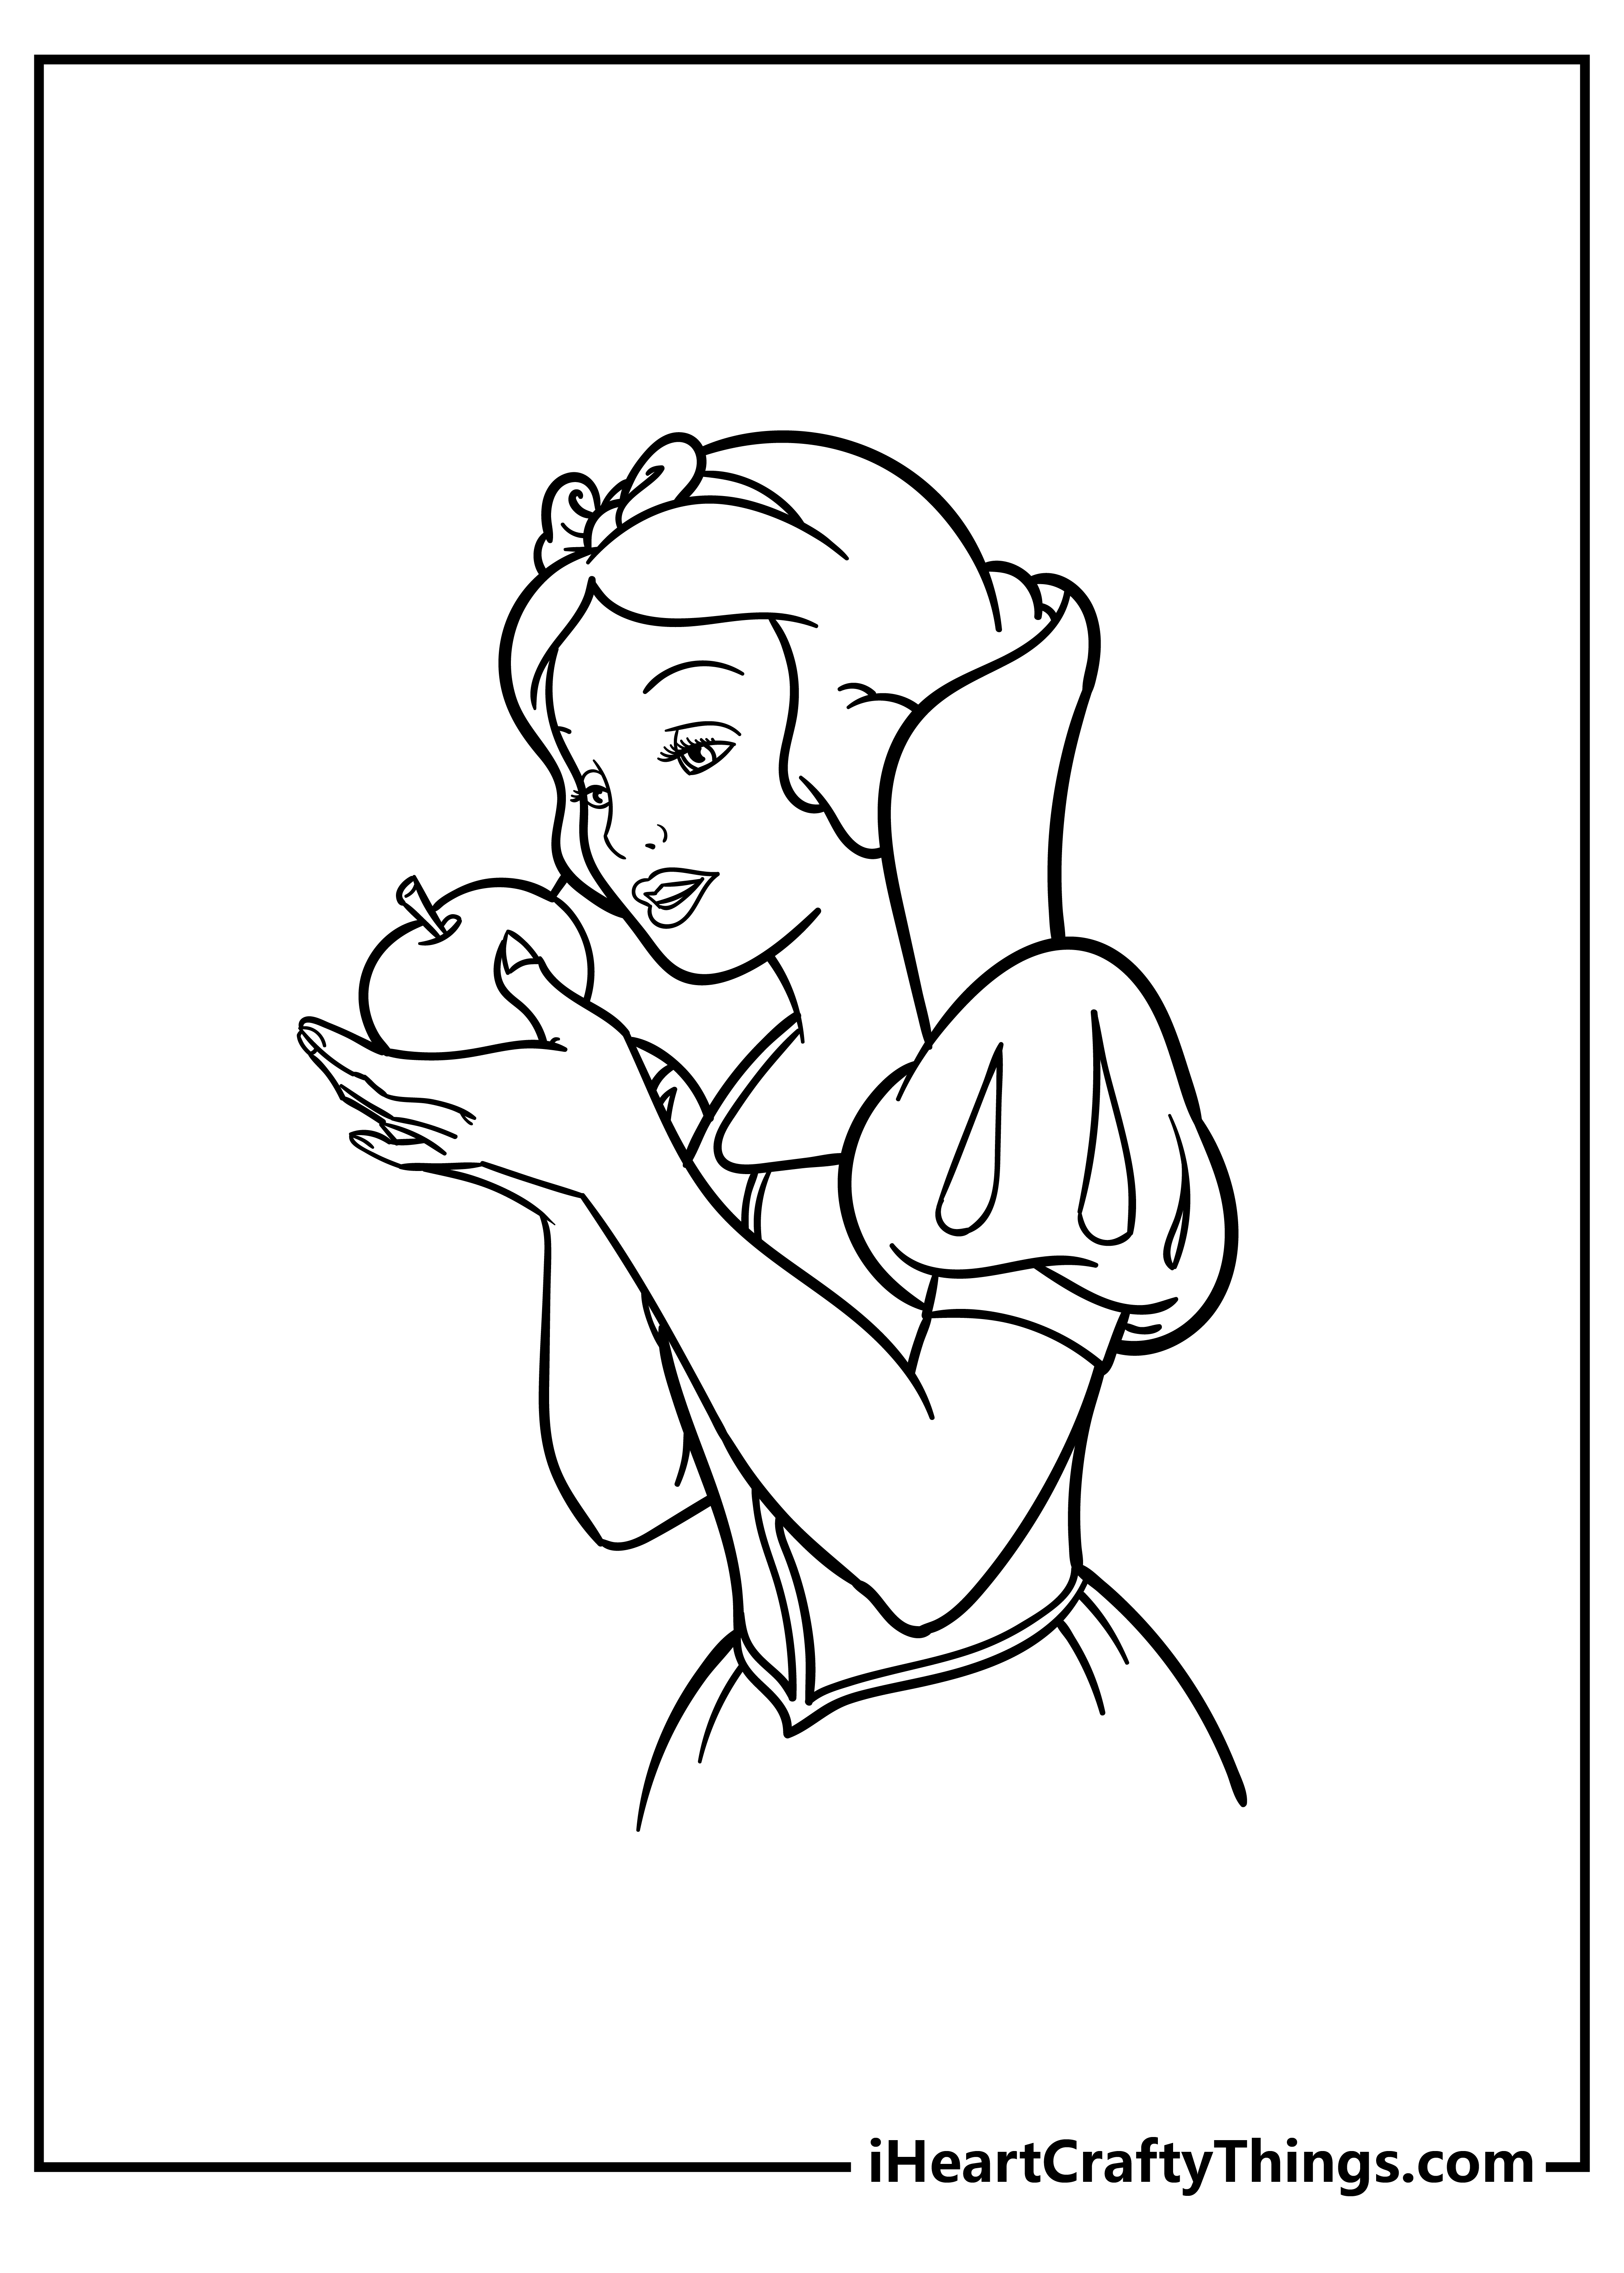 Snow White Coloring Book for kids free printable